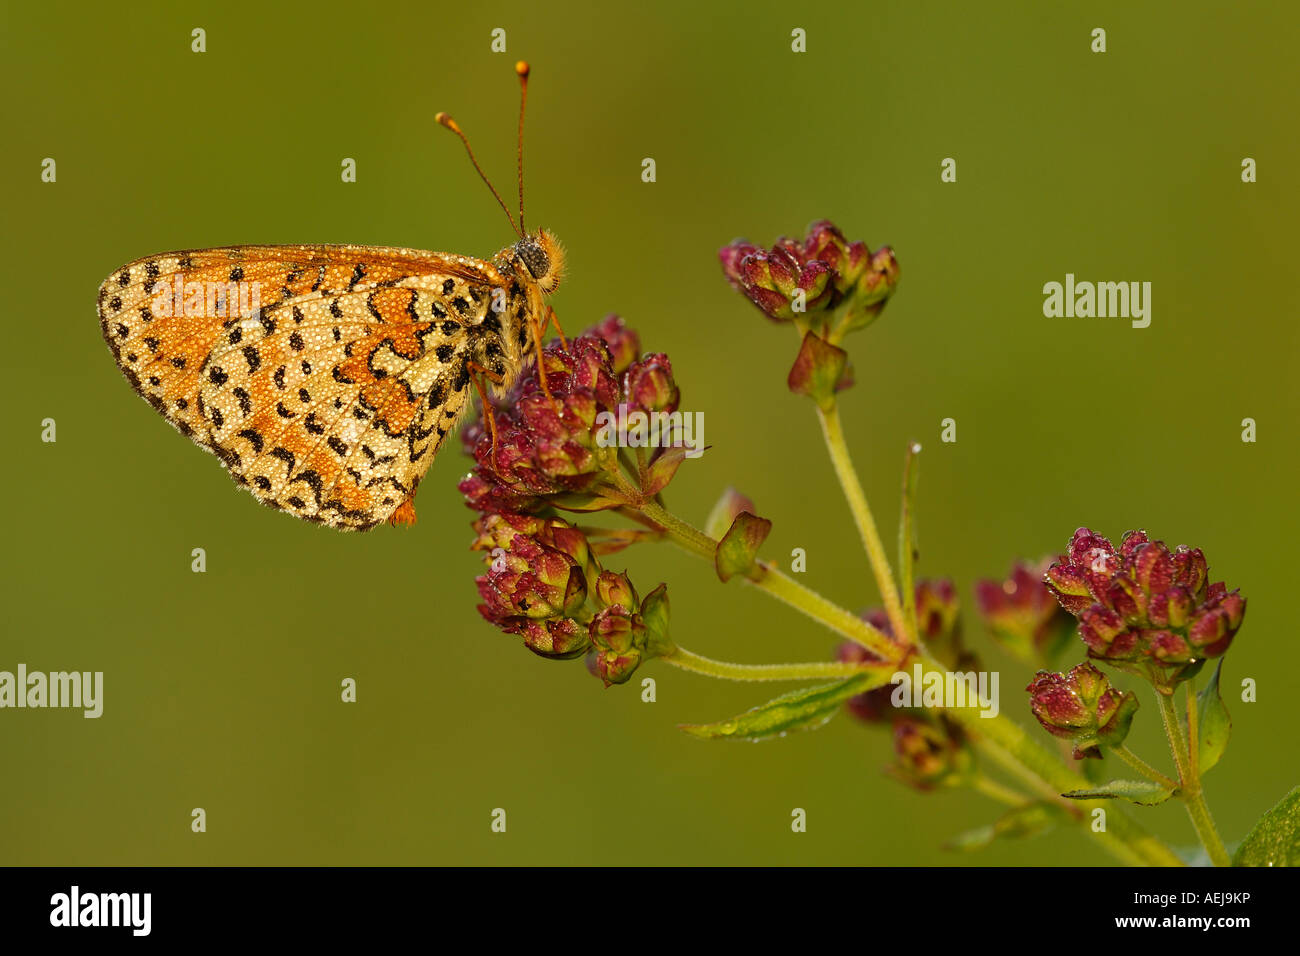 Brush-footed butterfly (Melitaea didyma) con dewdrops Foto Stock